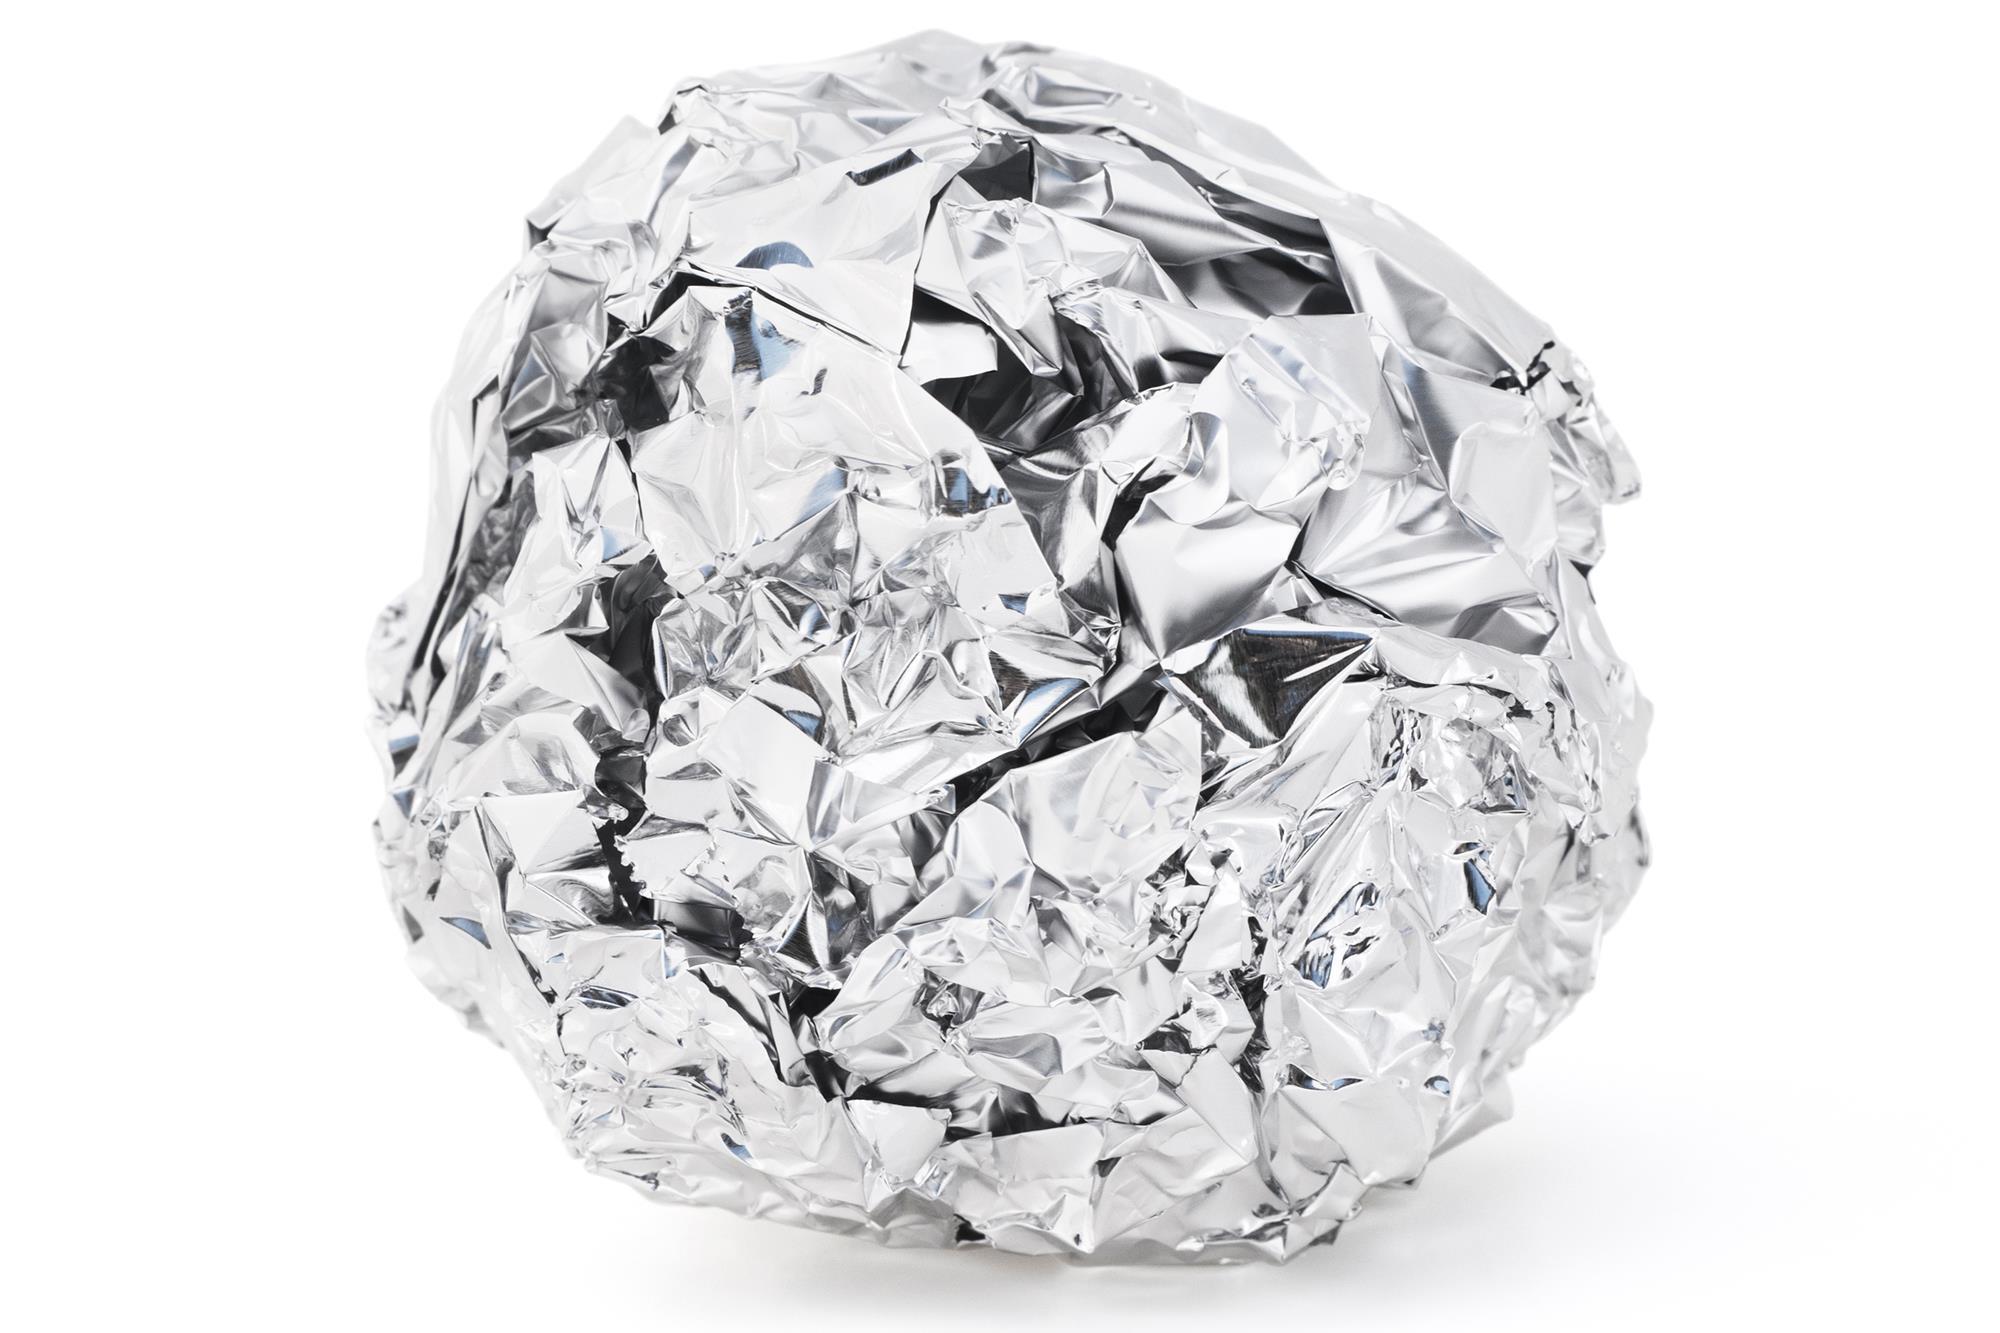 Is Aluminum Foil Recyclable? The Answer Is Not That Simple